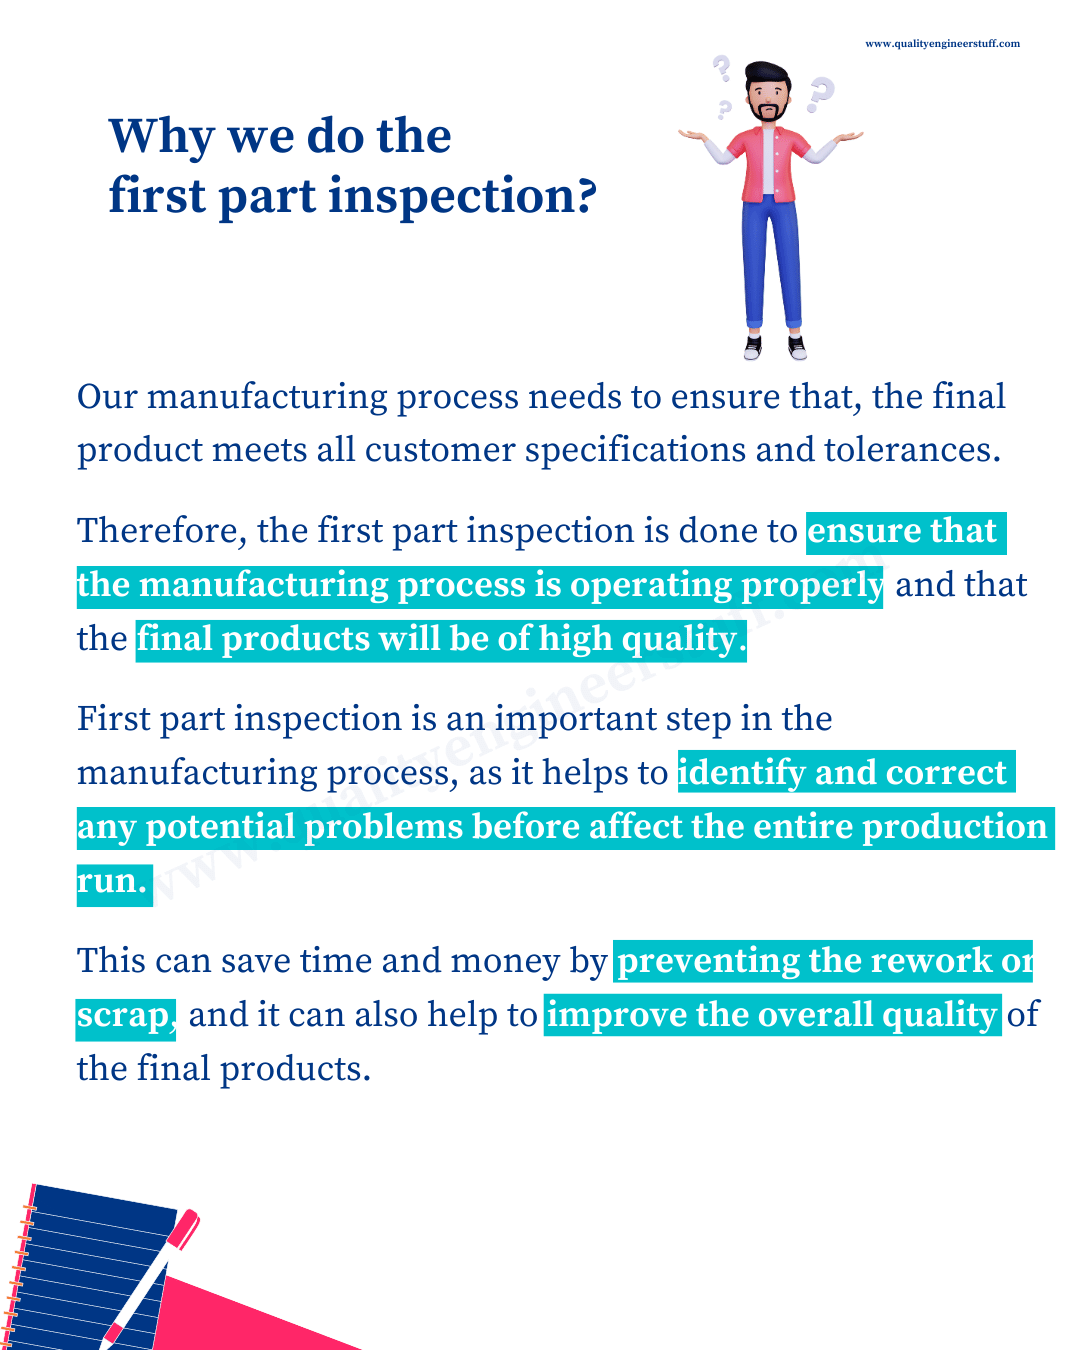 why first part inspection